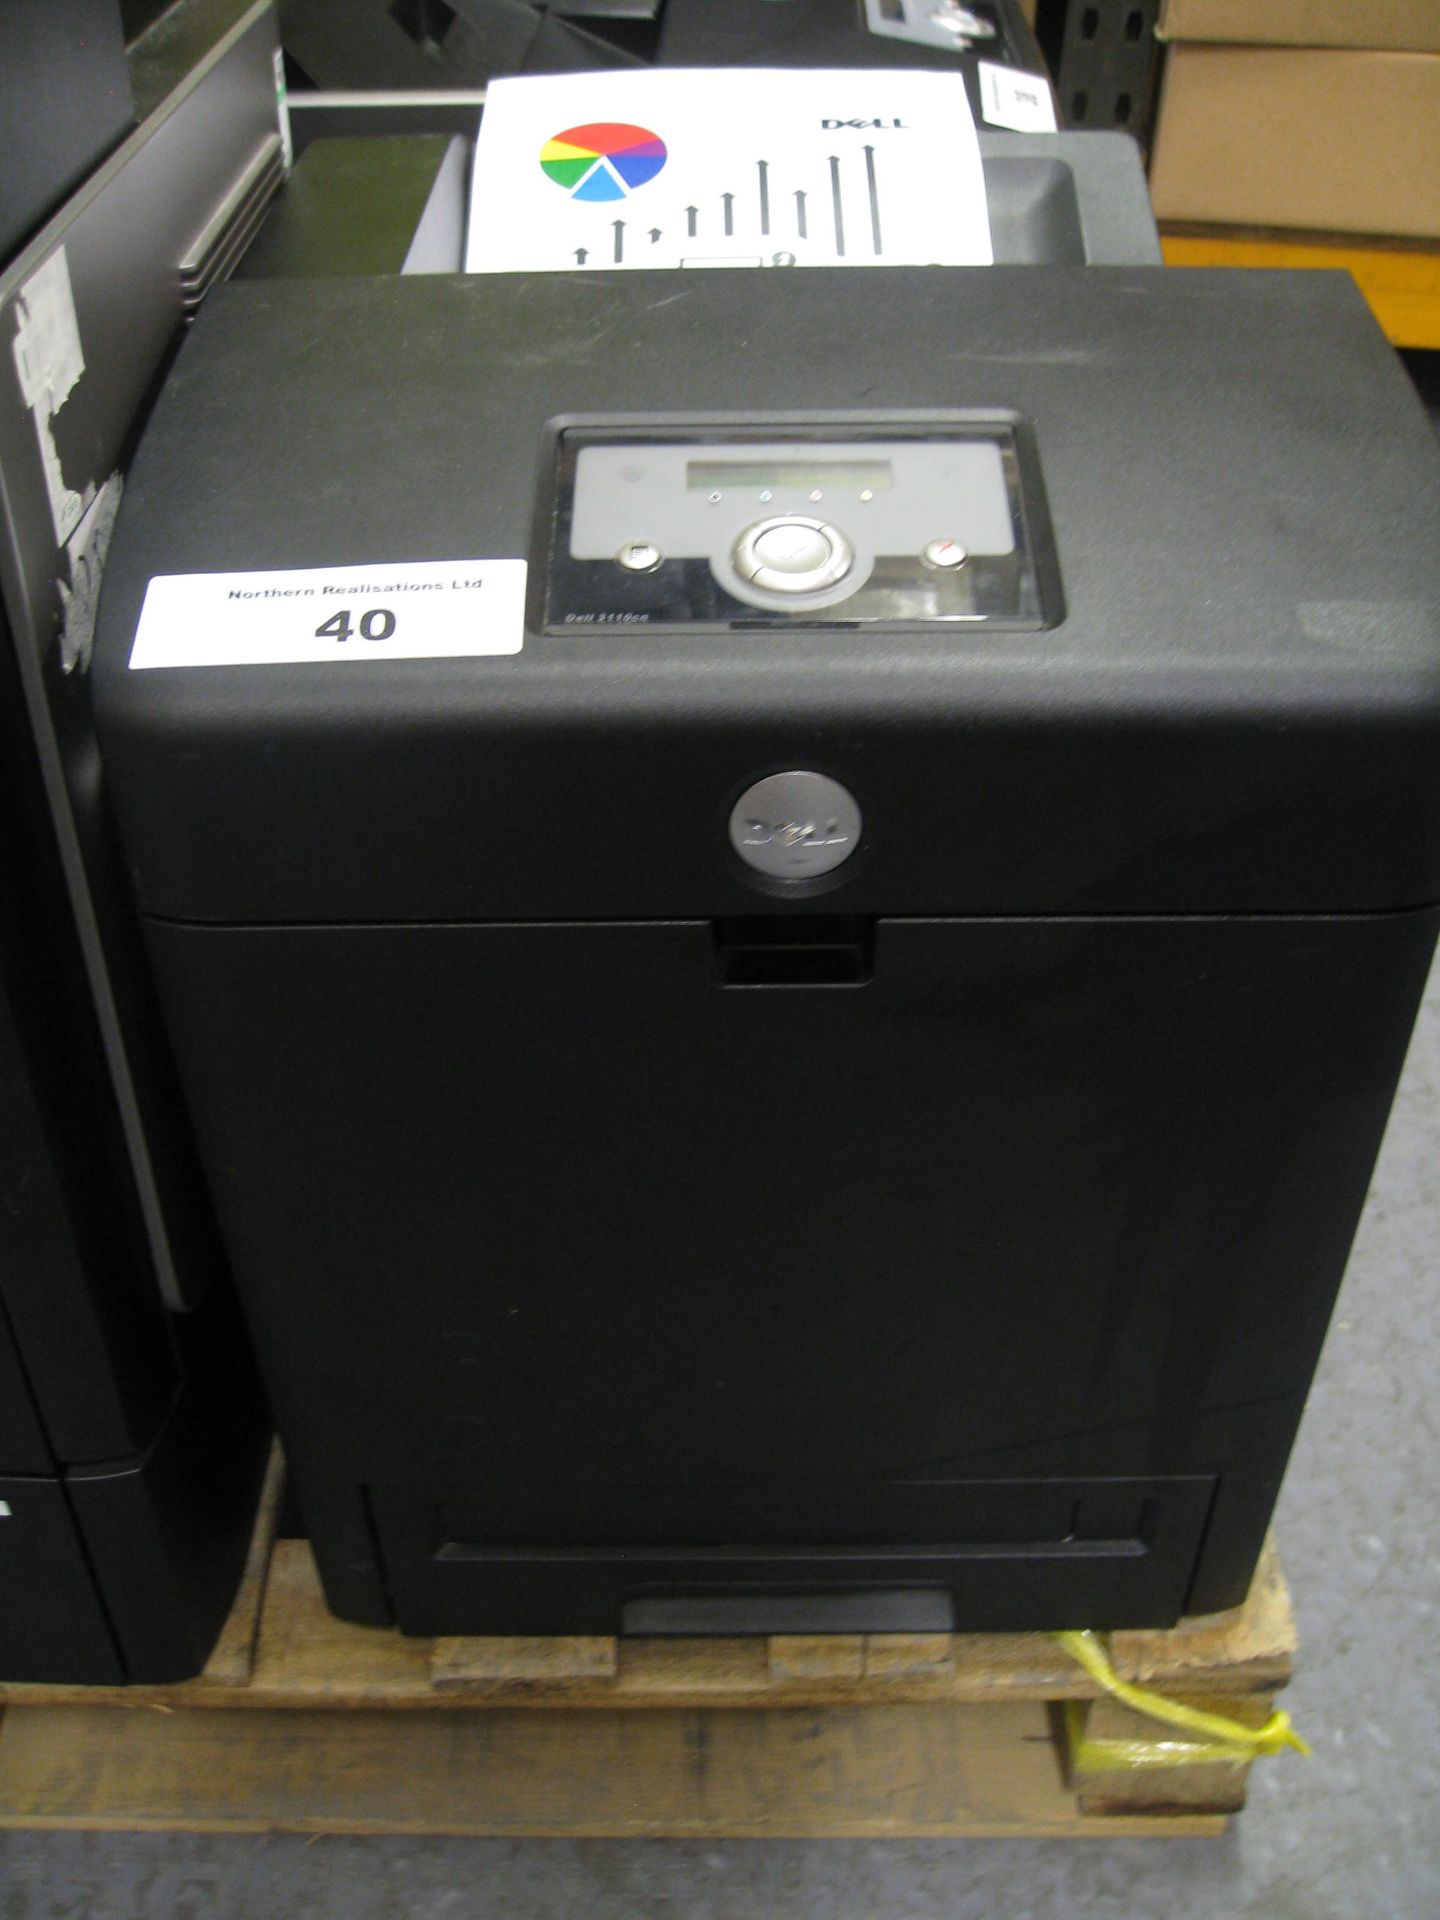 DELL COLOUR LASER PRINTER. MODEL 3110CN. WITH TEST PRINT